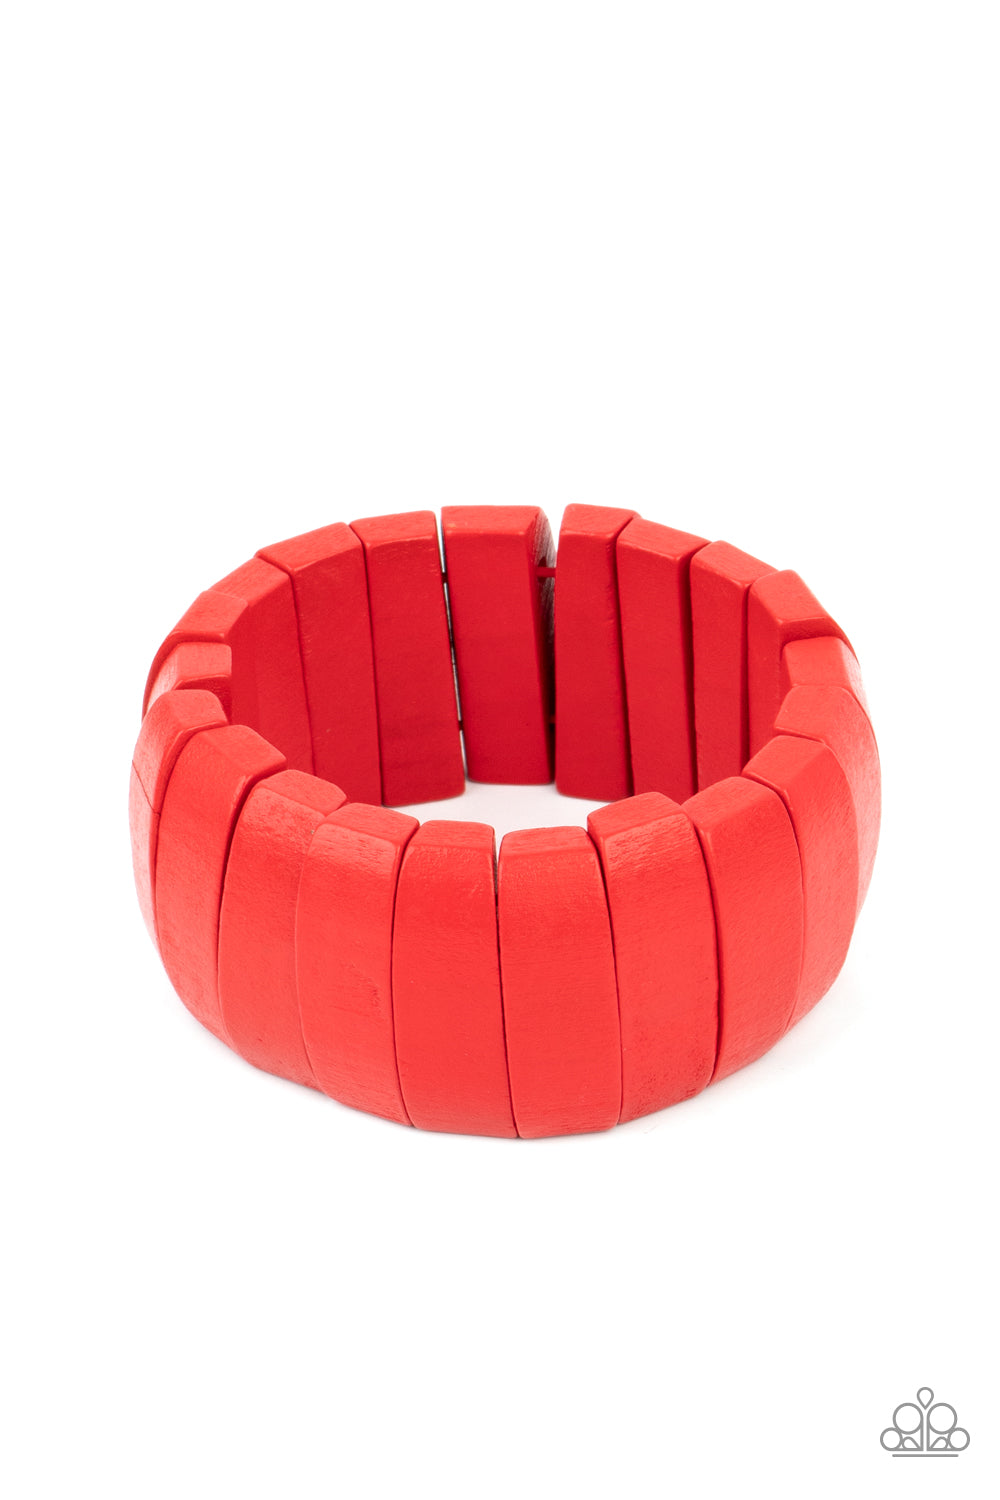 Paparazzi Accessories Raise the BARBADOS - Red Wood Bracelets - Lady T Accessories